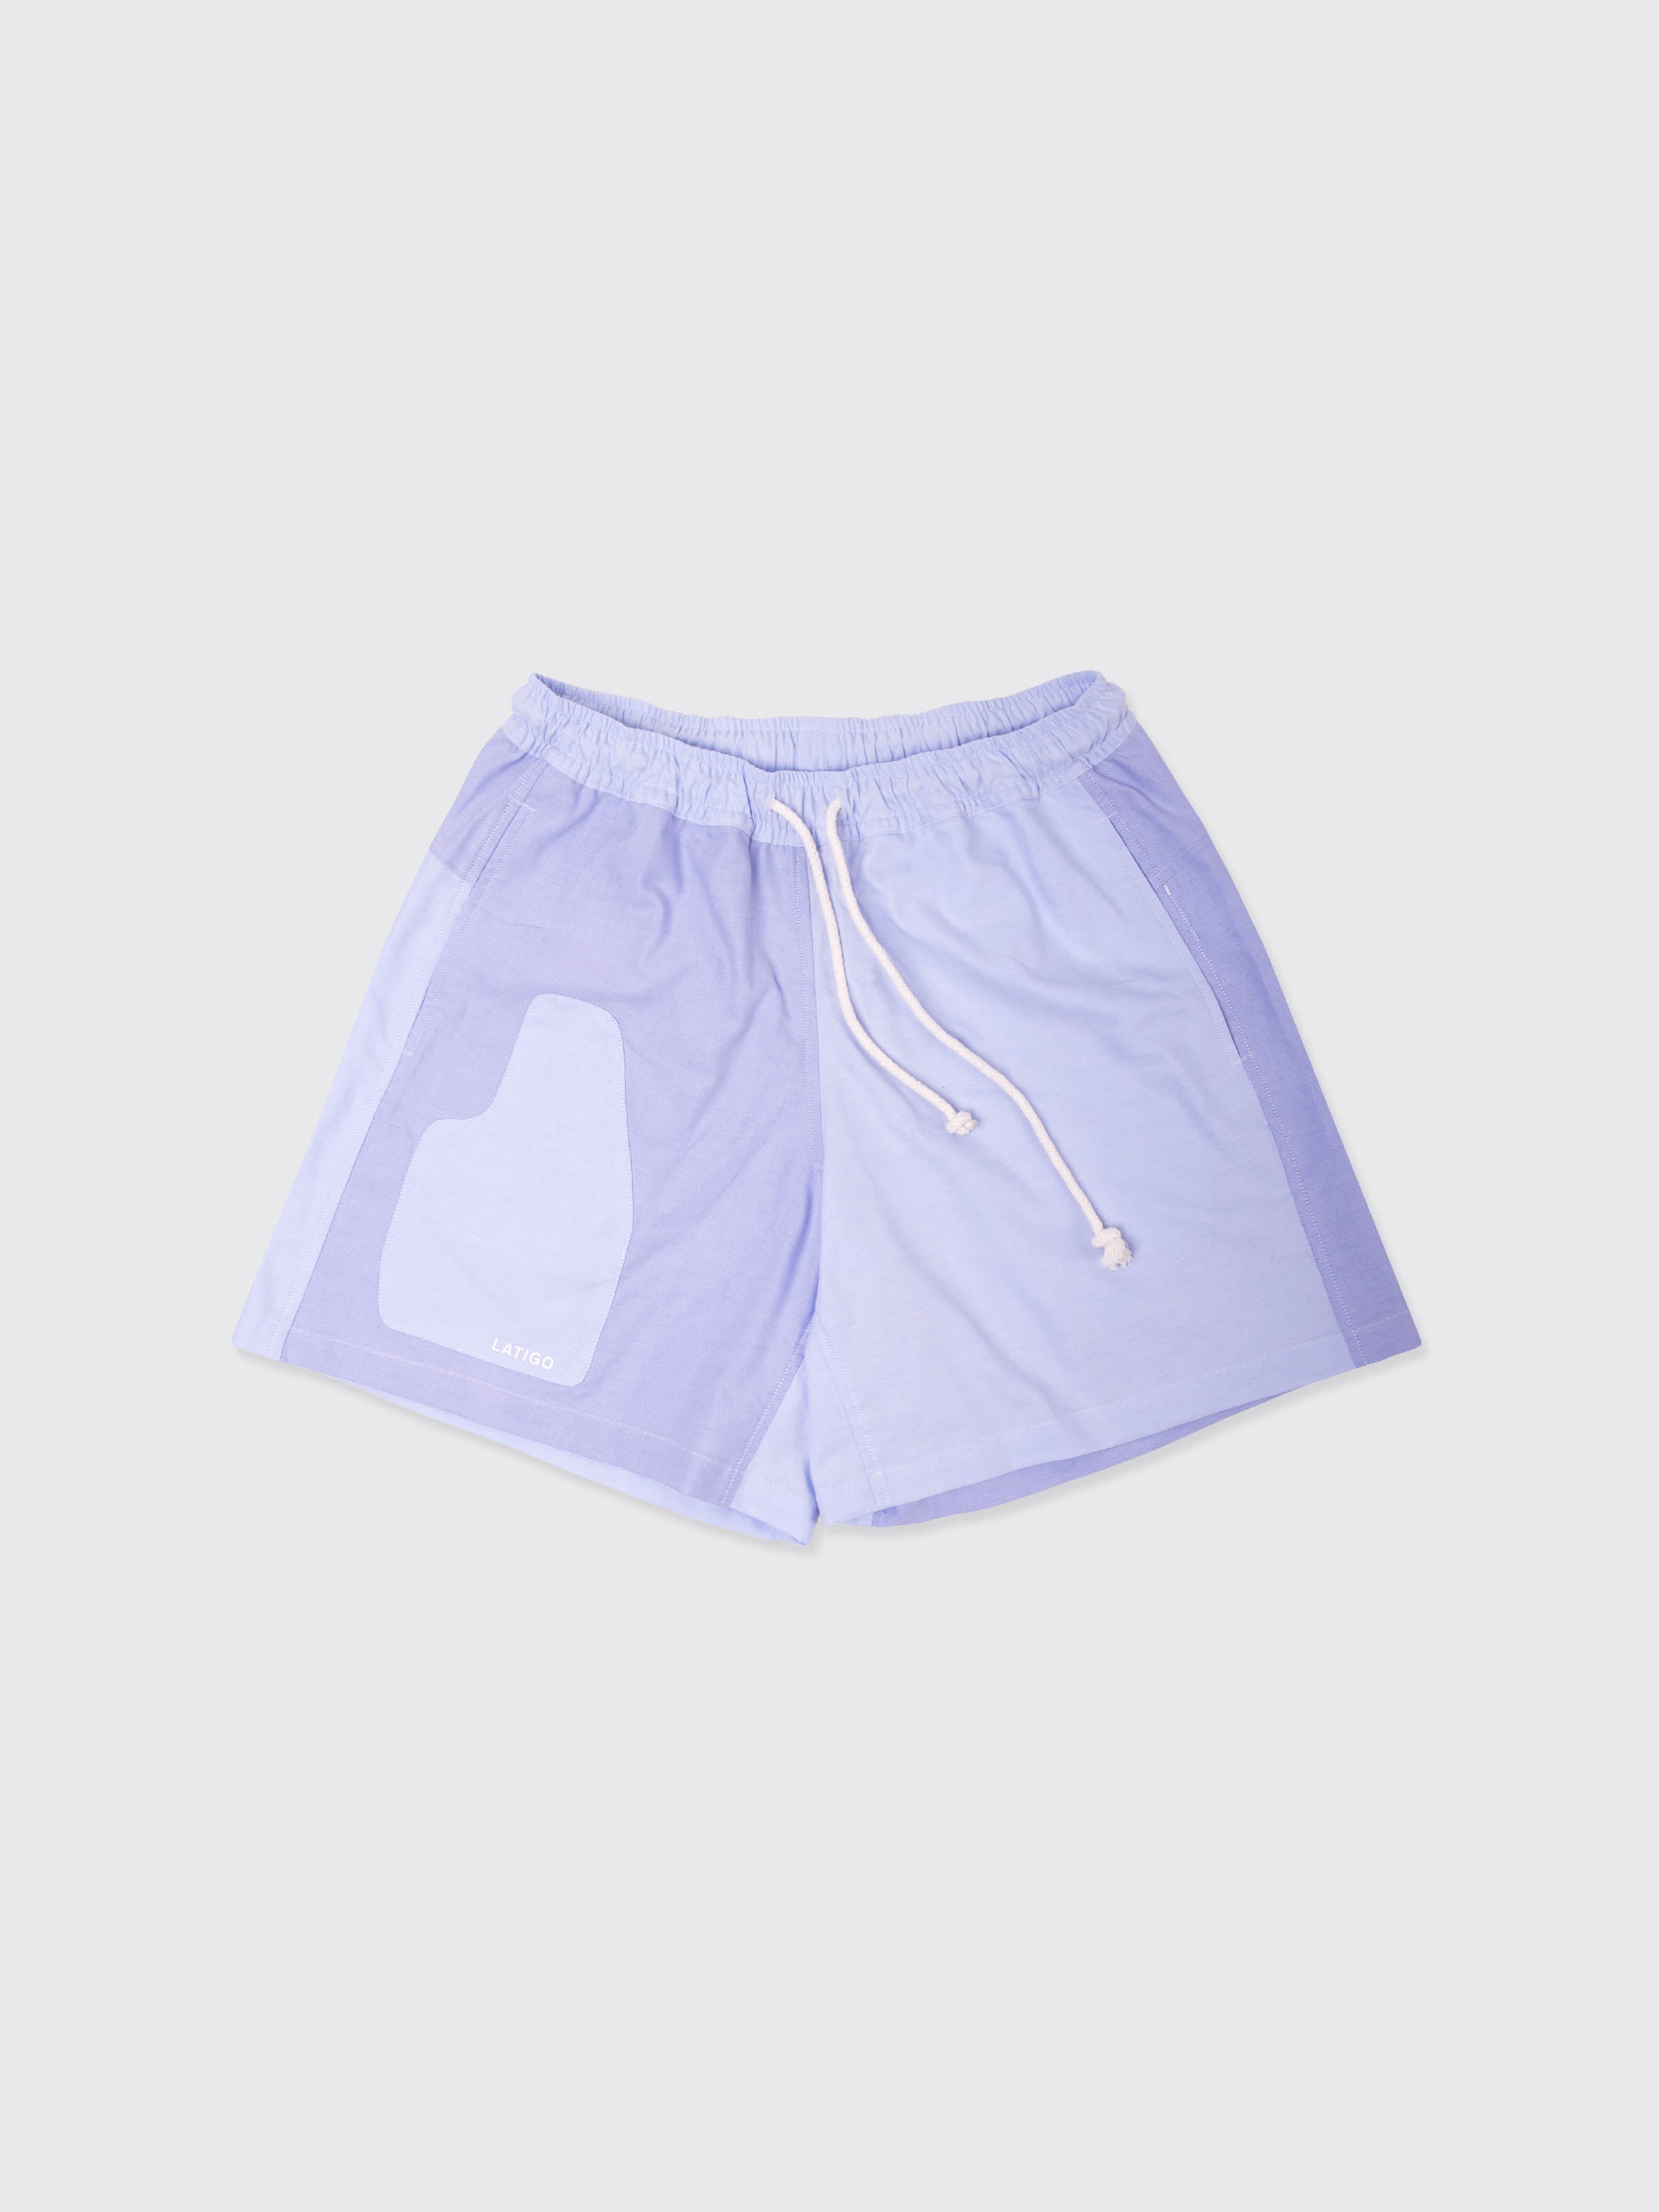 "Oxford Pack" Shorts Blue